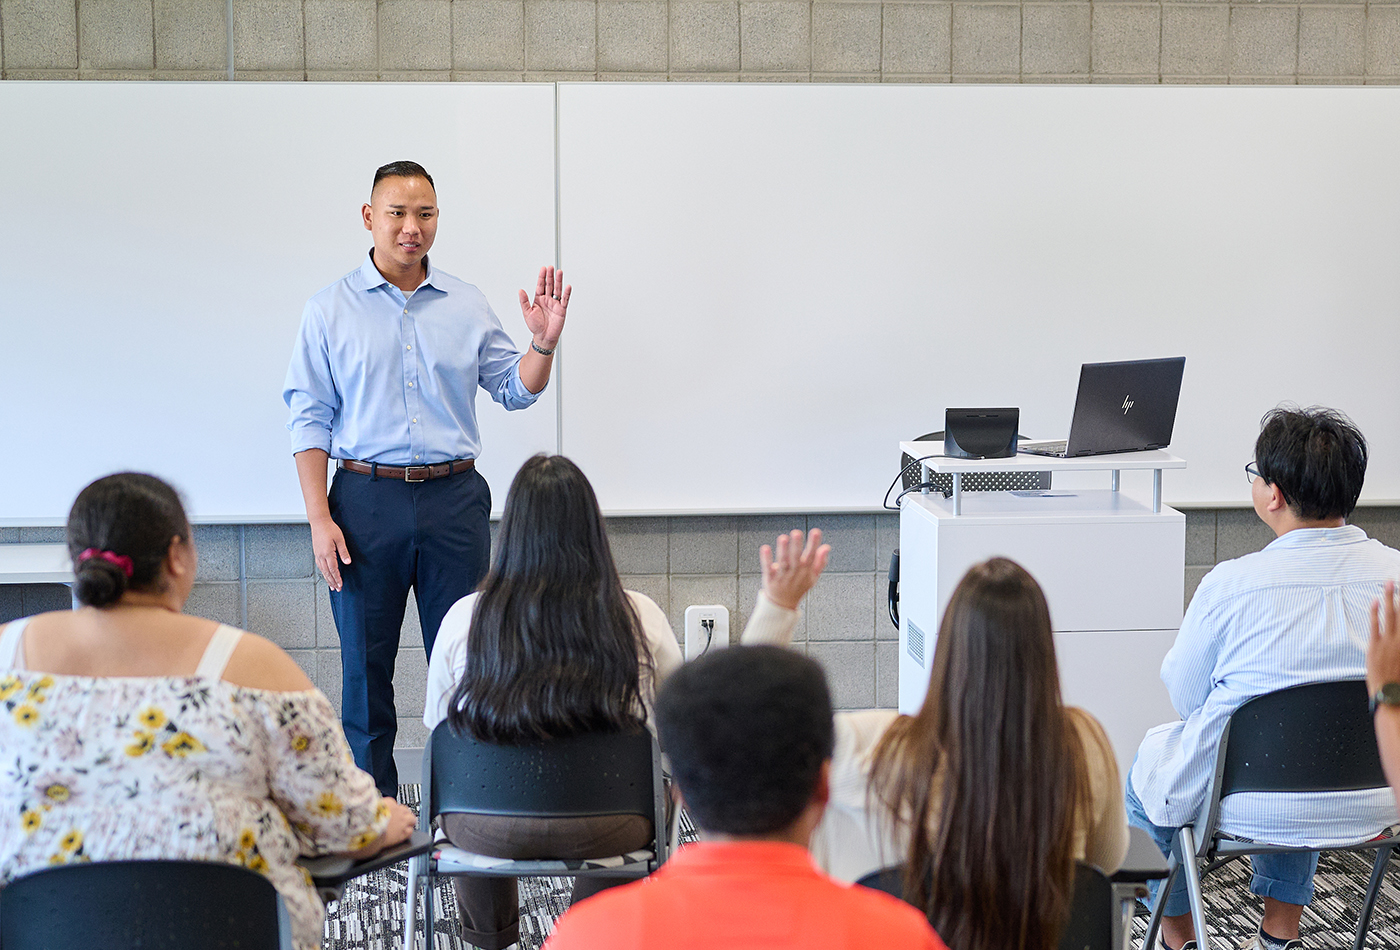 A faculty member addressing his class in a classroom.